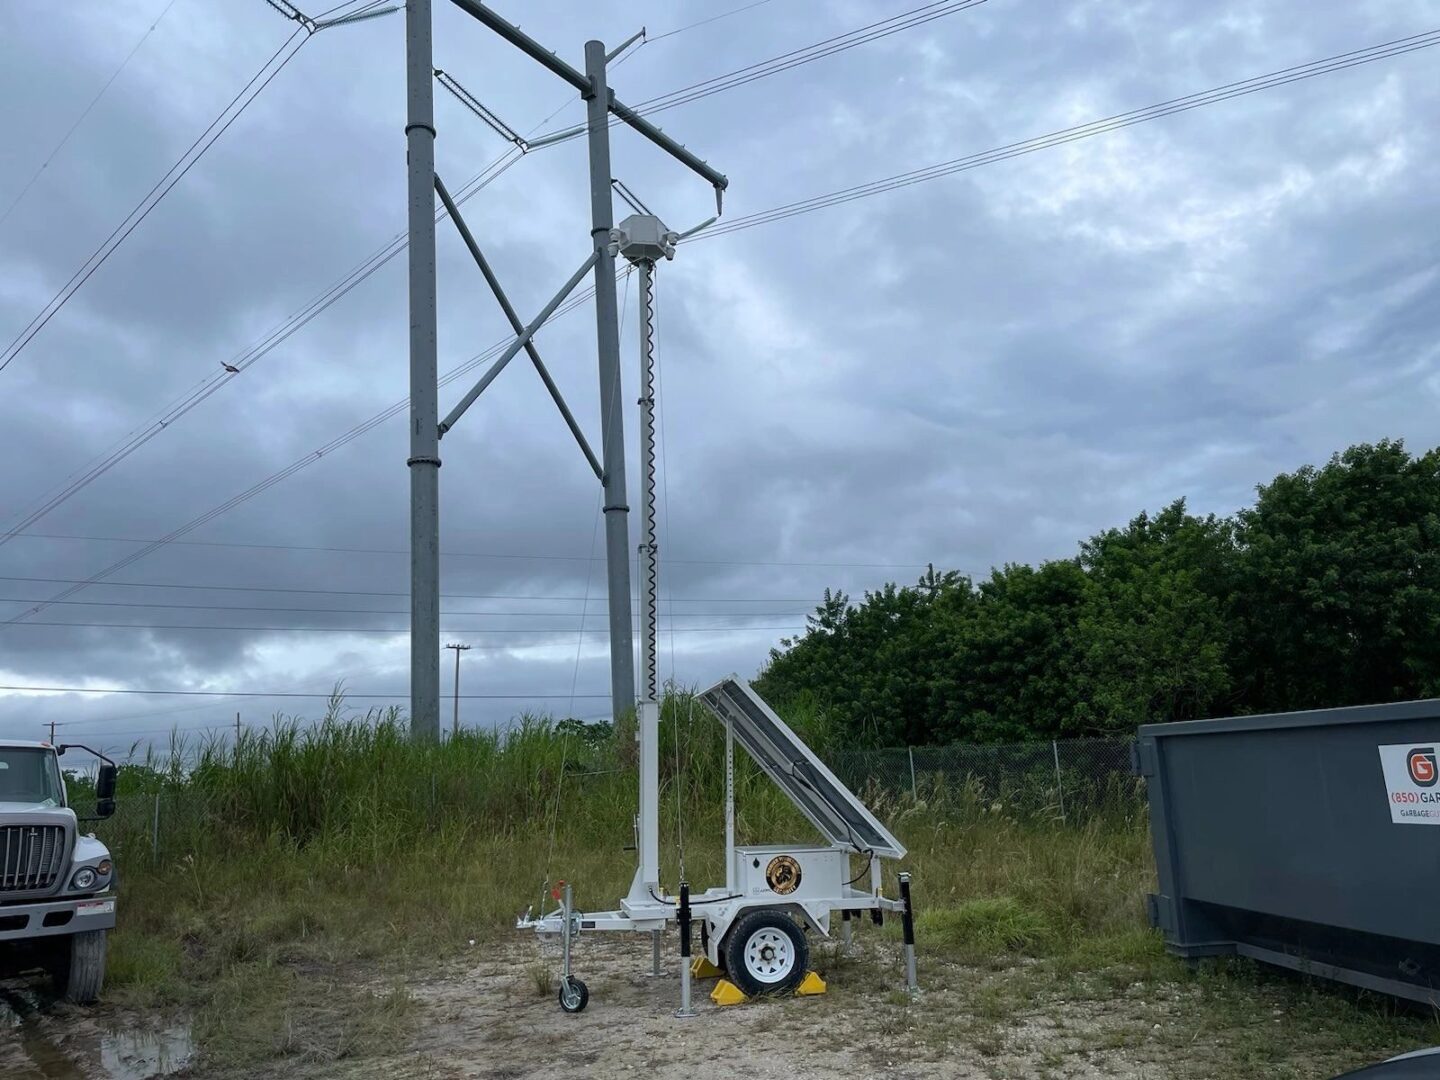 A utility trailer with a large pole and a crane.